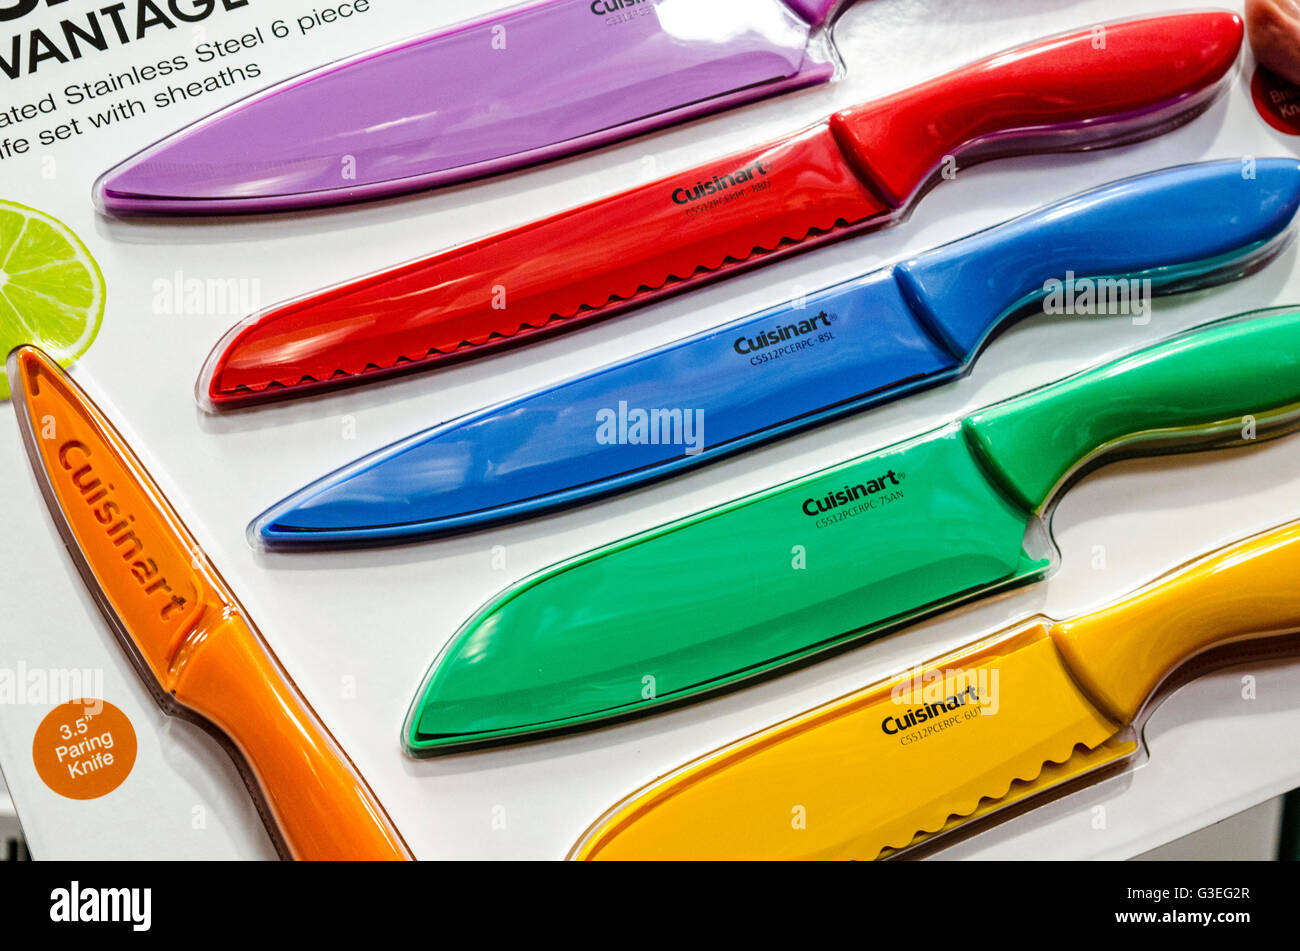 https://c8.alamy.com/comp/G3EG2R/cuisinart-brightly-colored-knives-at-a-costco-store-in-san-leandro-G3EG2R.jpg